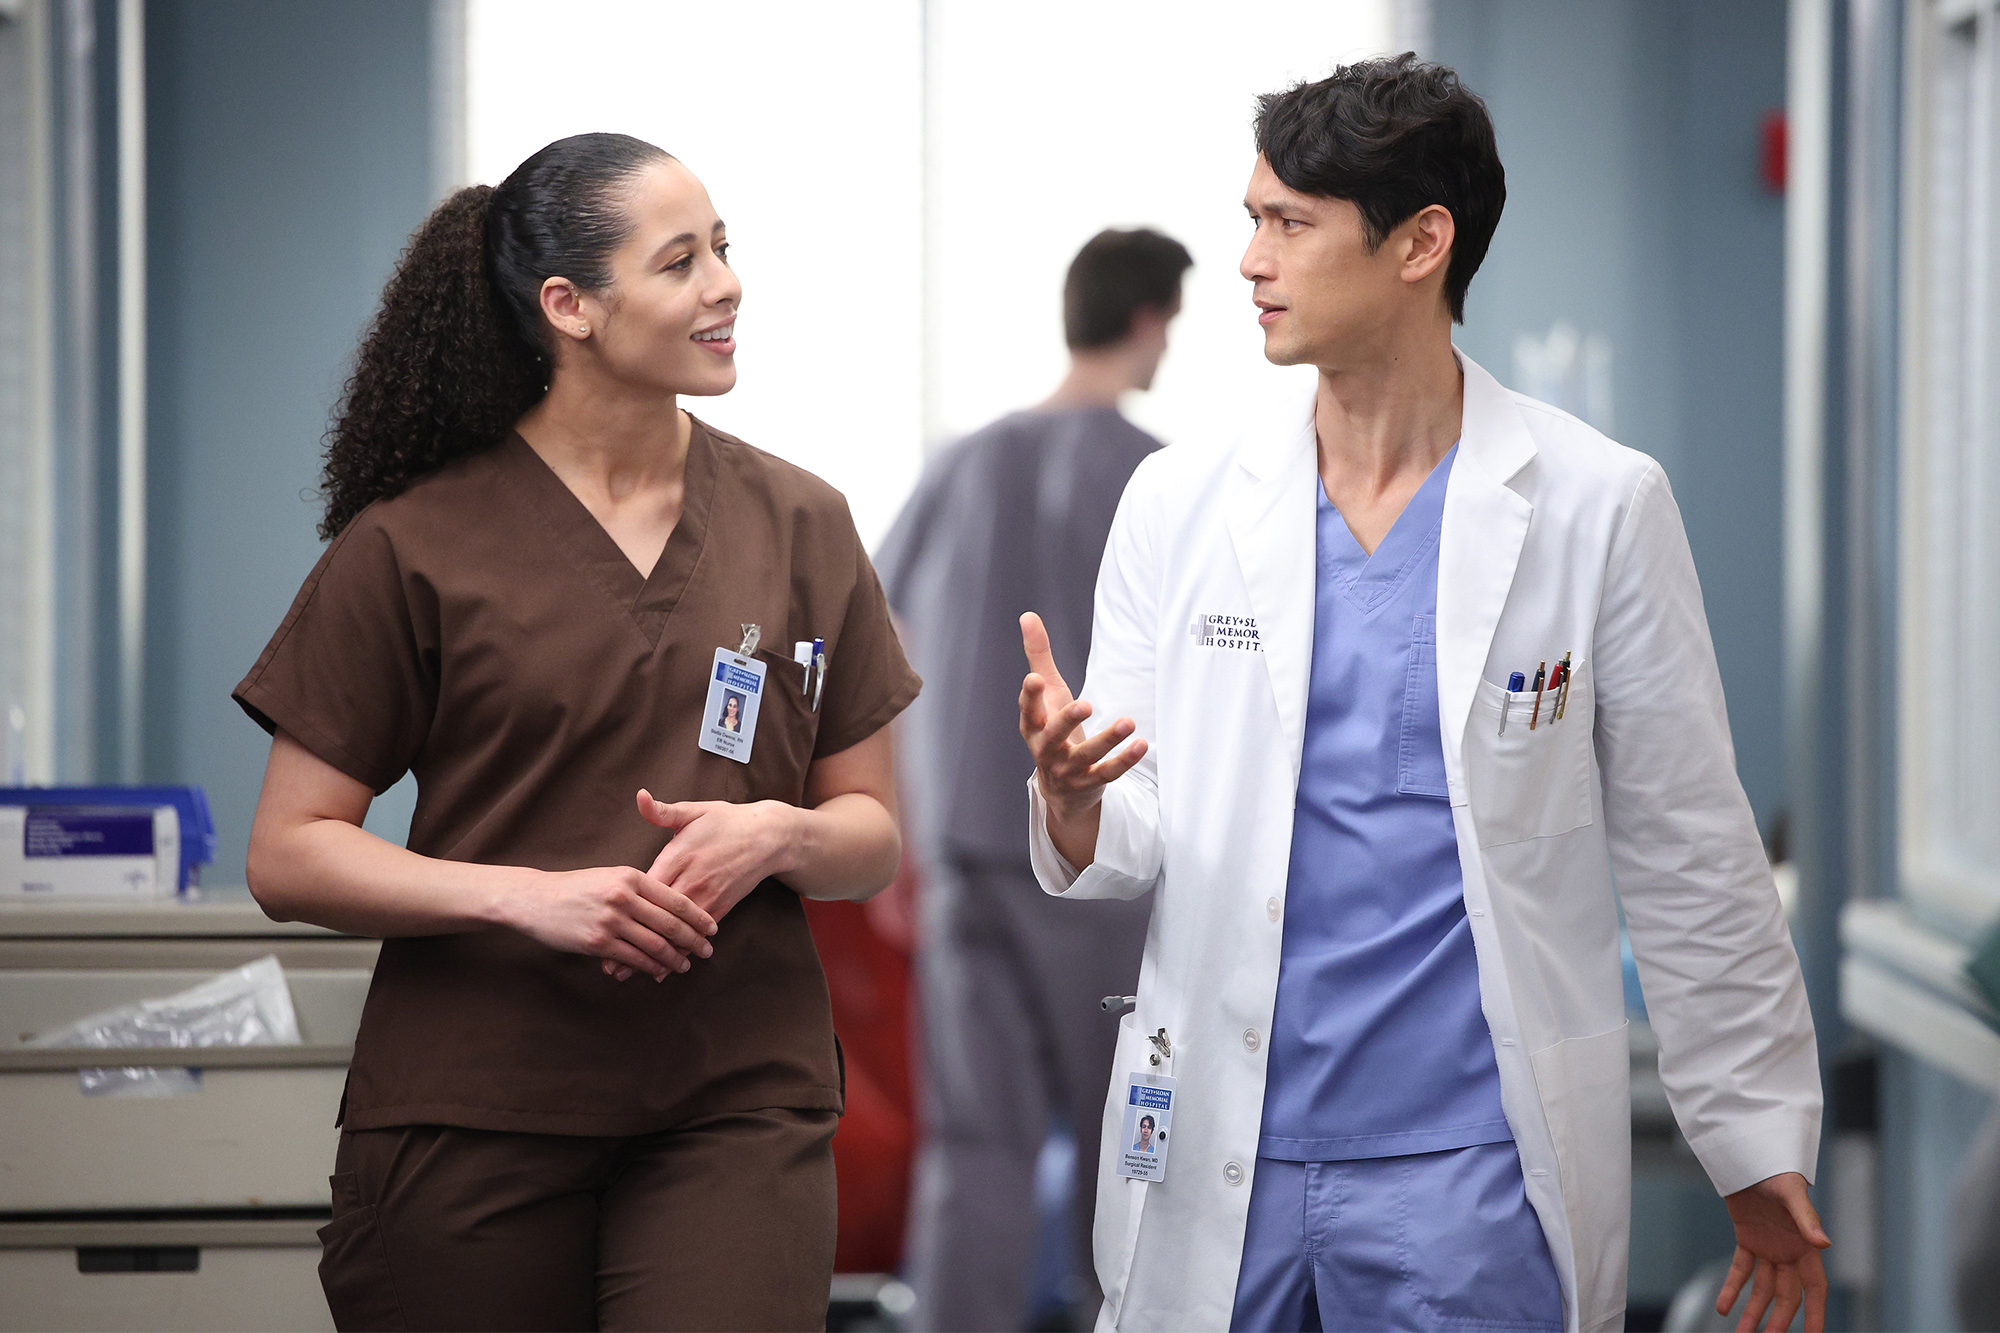 GREY’S ANATOMY - “Gunpowder and Lead” - Amelia takes her personal problems out on her work colleagues, and the threats against Bailey come to a terrifying head. Lucas and Jules make a risky decision on a patient, and Mika struggles with burnout. THURSDAY, APRIL 20 (9:00-10:01 p.m. EDT), on ABC. (ABC/Raymond Liu) JASMINE MCLEISH, HARRY SHUM JR.